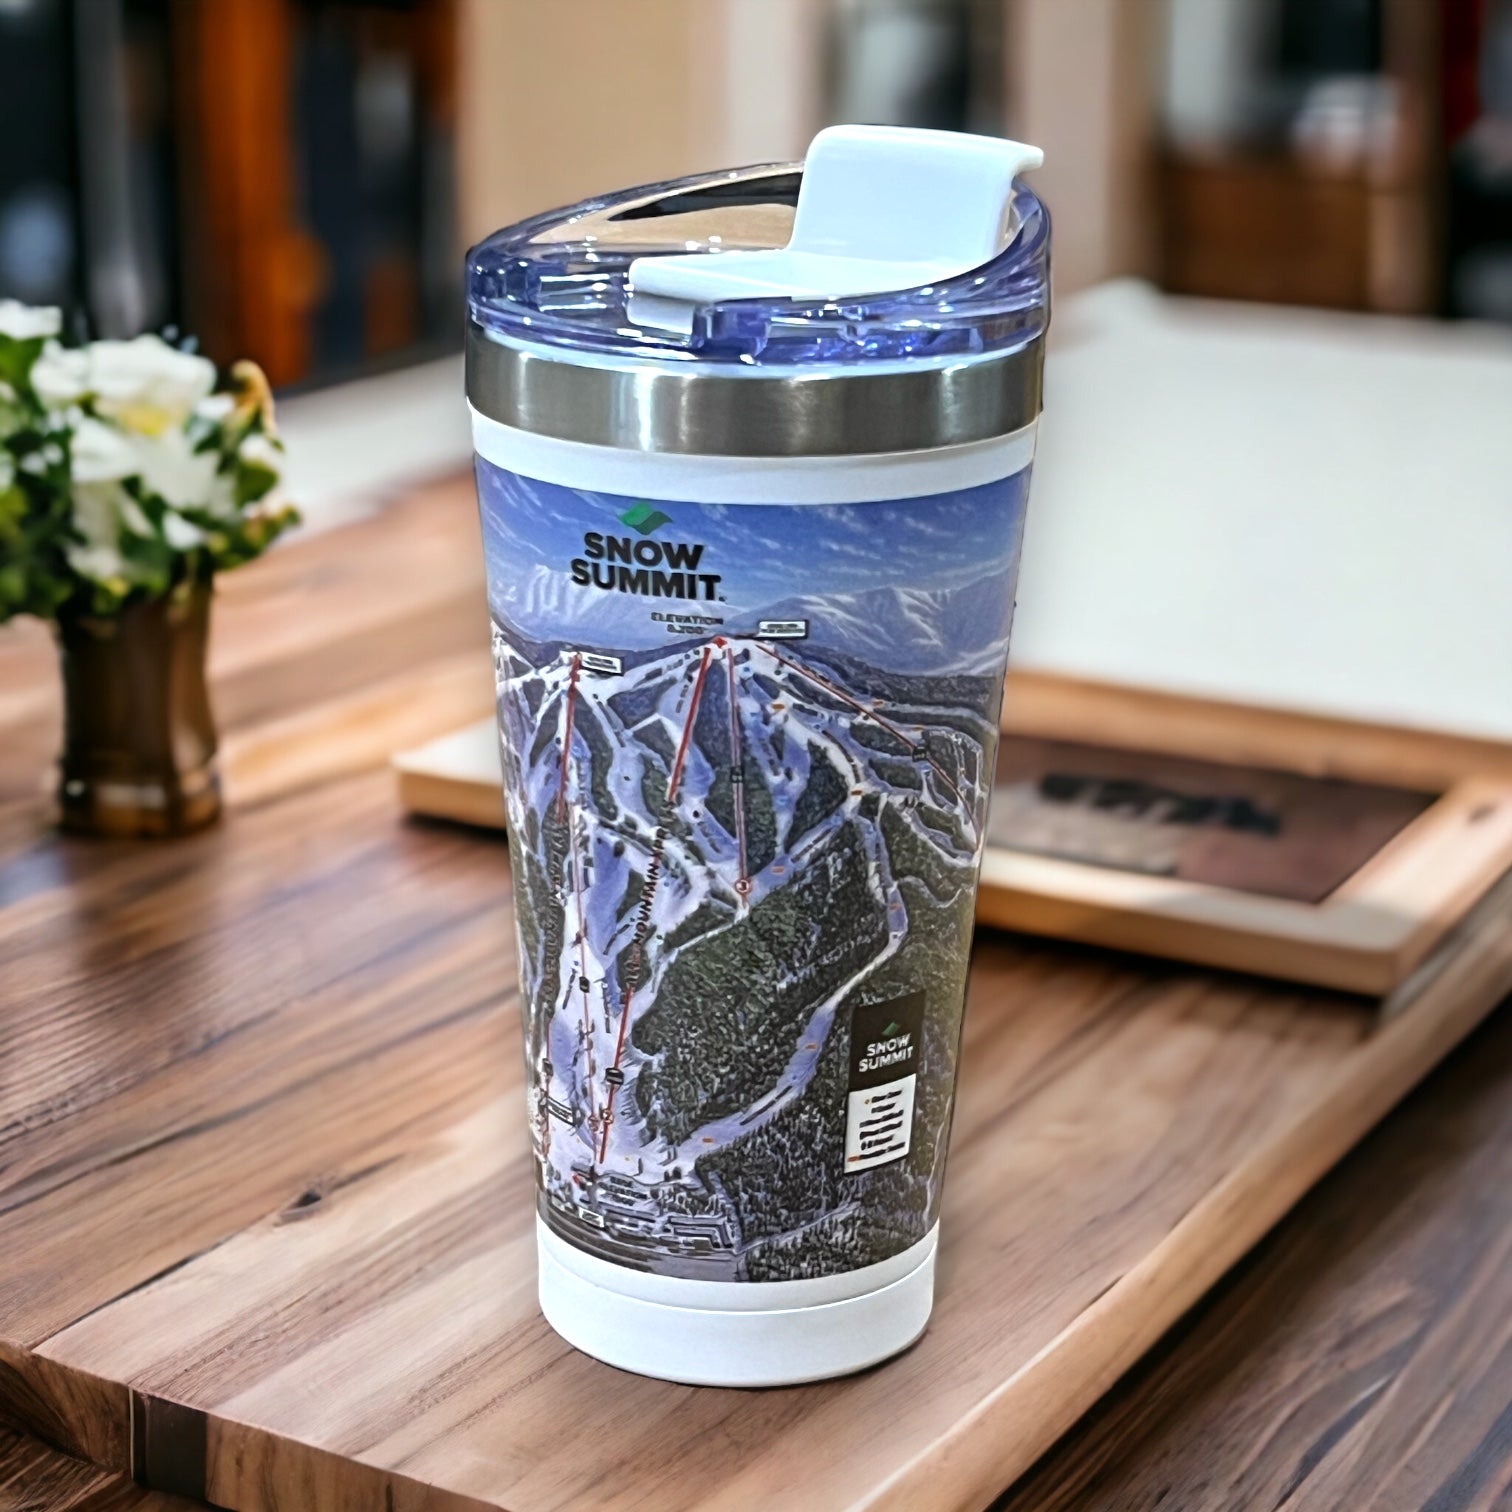 Snow Summit trails map tumbler with white base